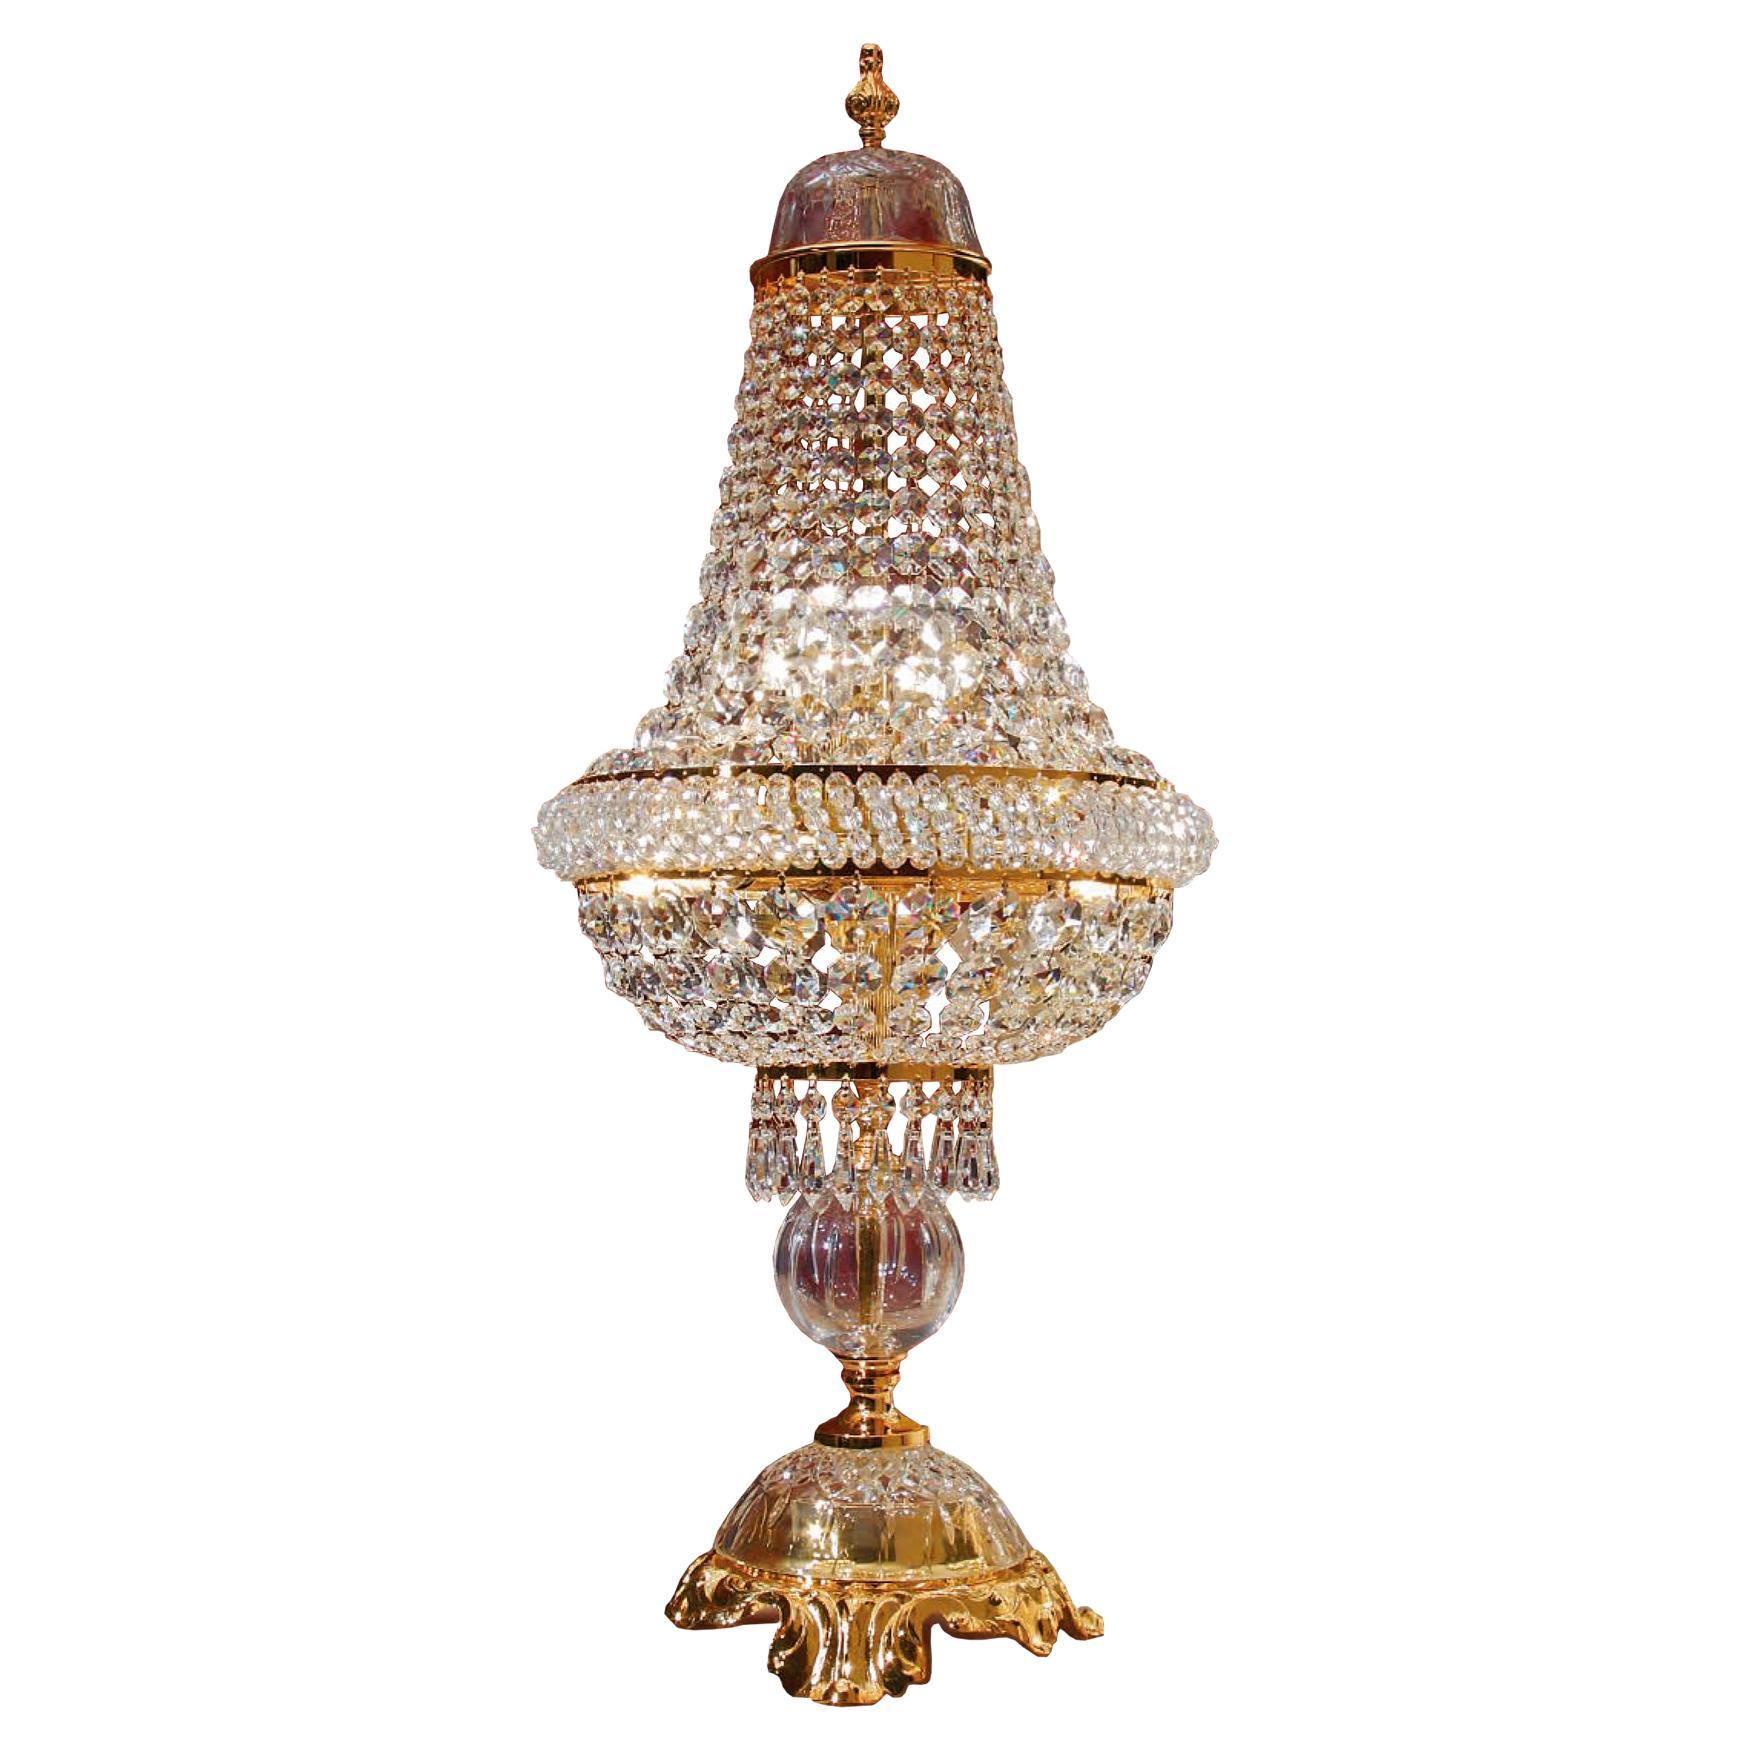 5 Lights Table Lamp in 24kt Gold Finish Embellished with Clear Scholer Crystals